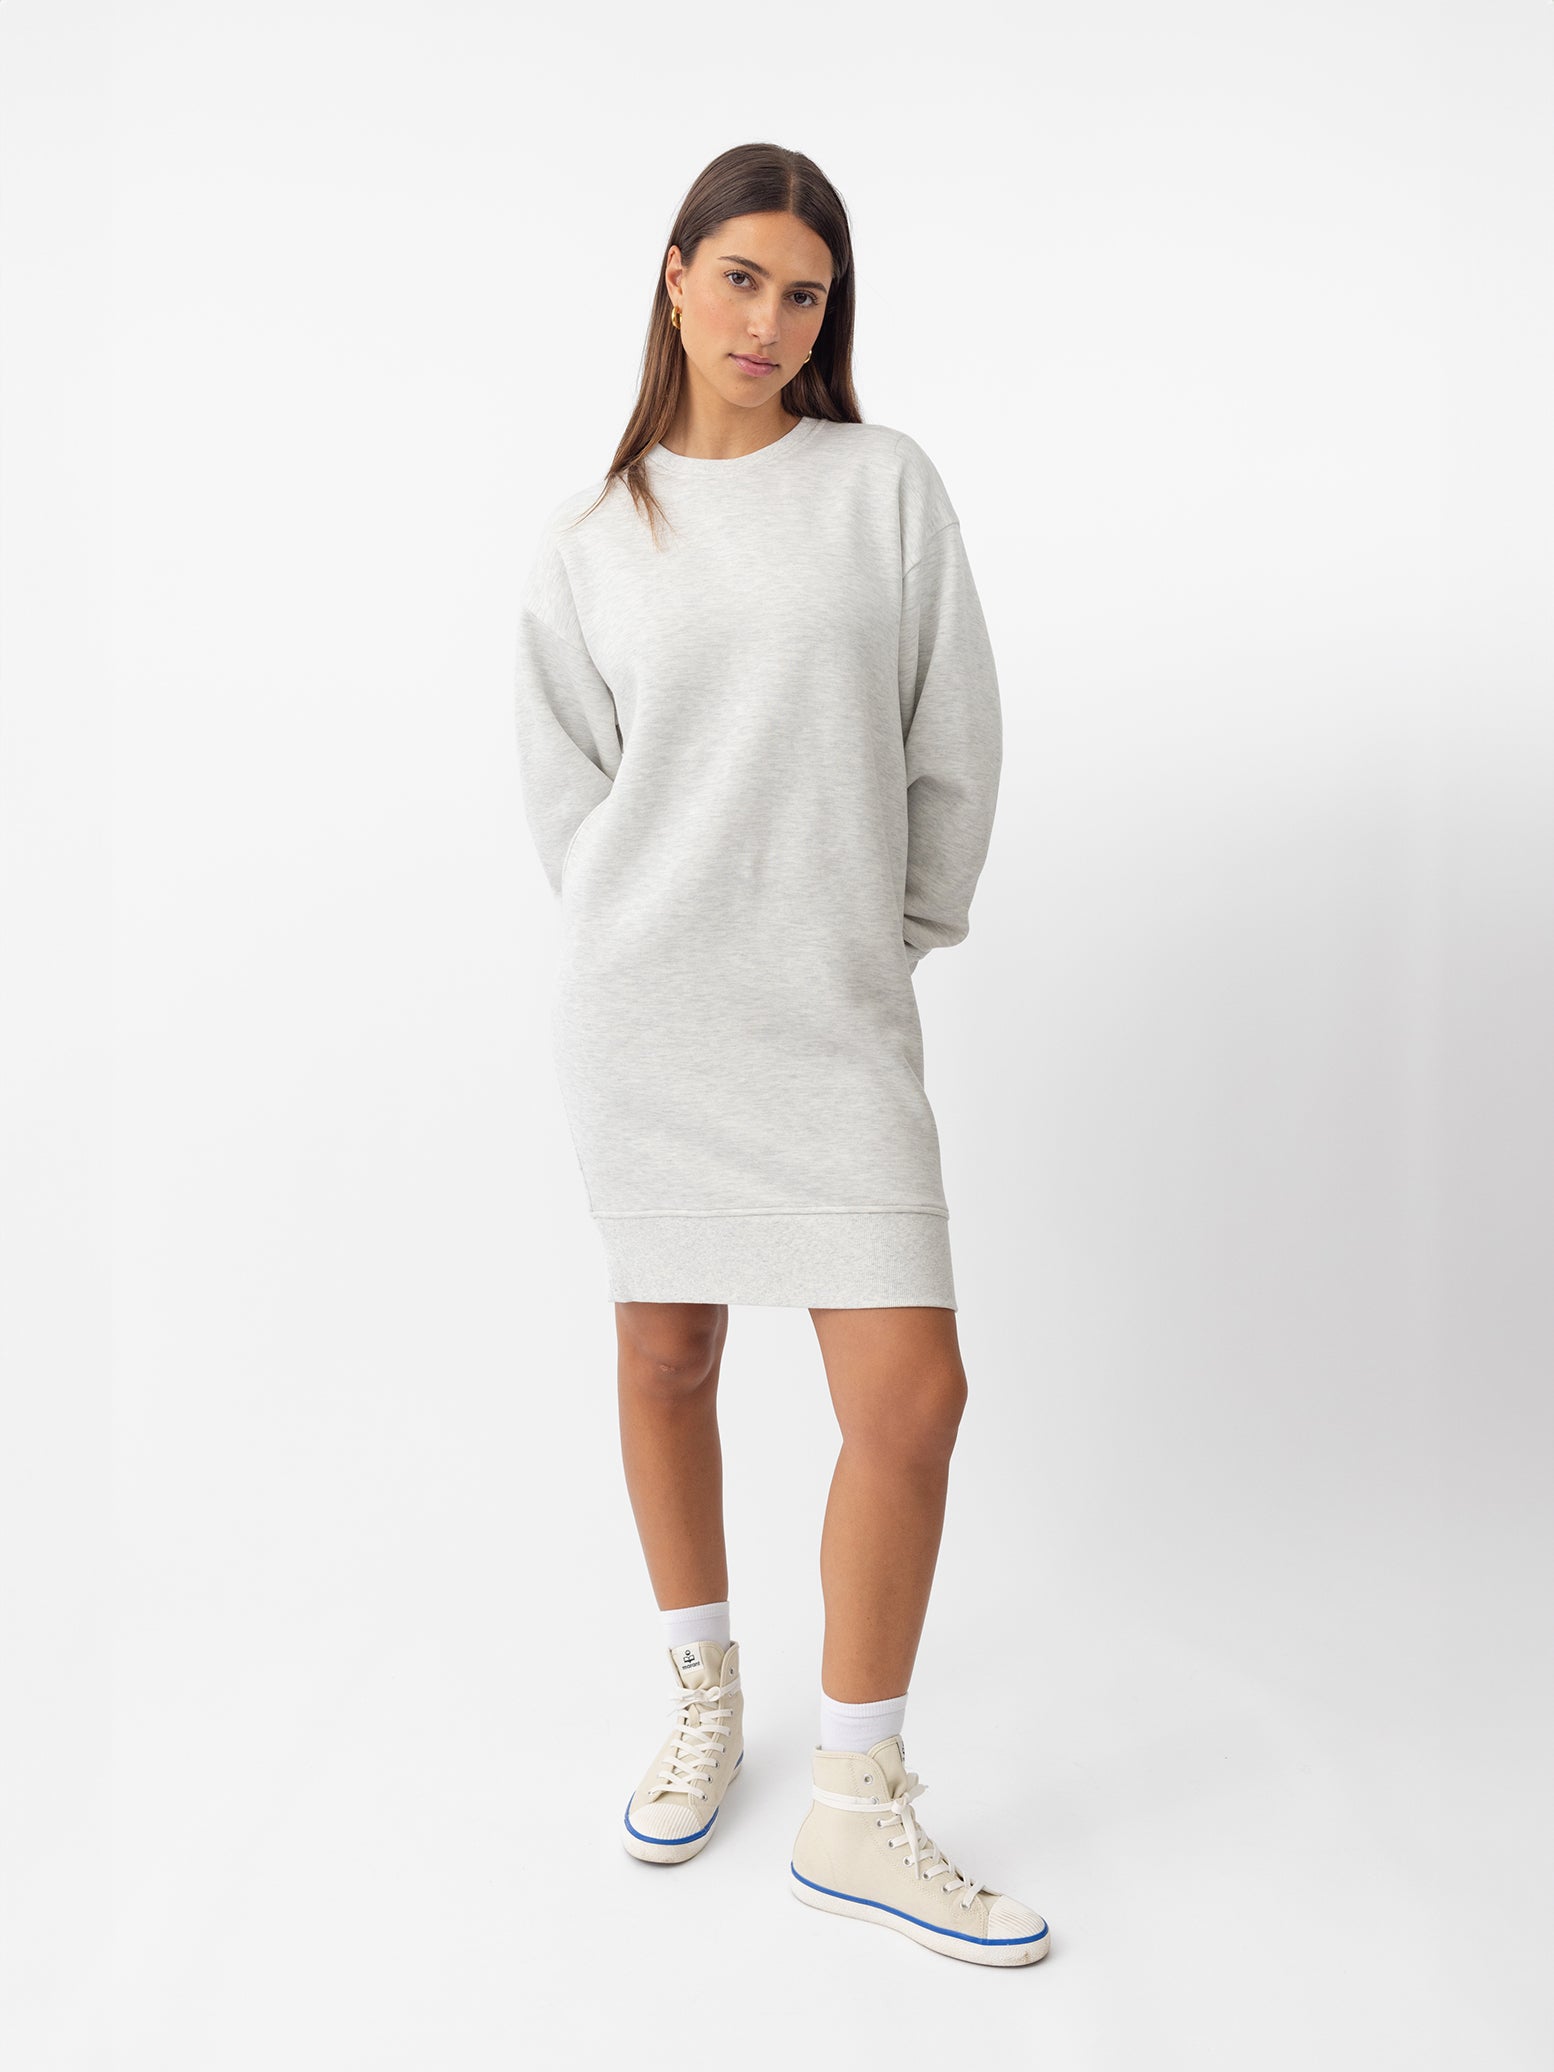 Woman wearing Heather Grey CityScape Crewneck Dress with white background 